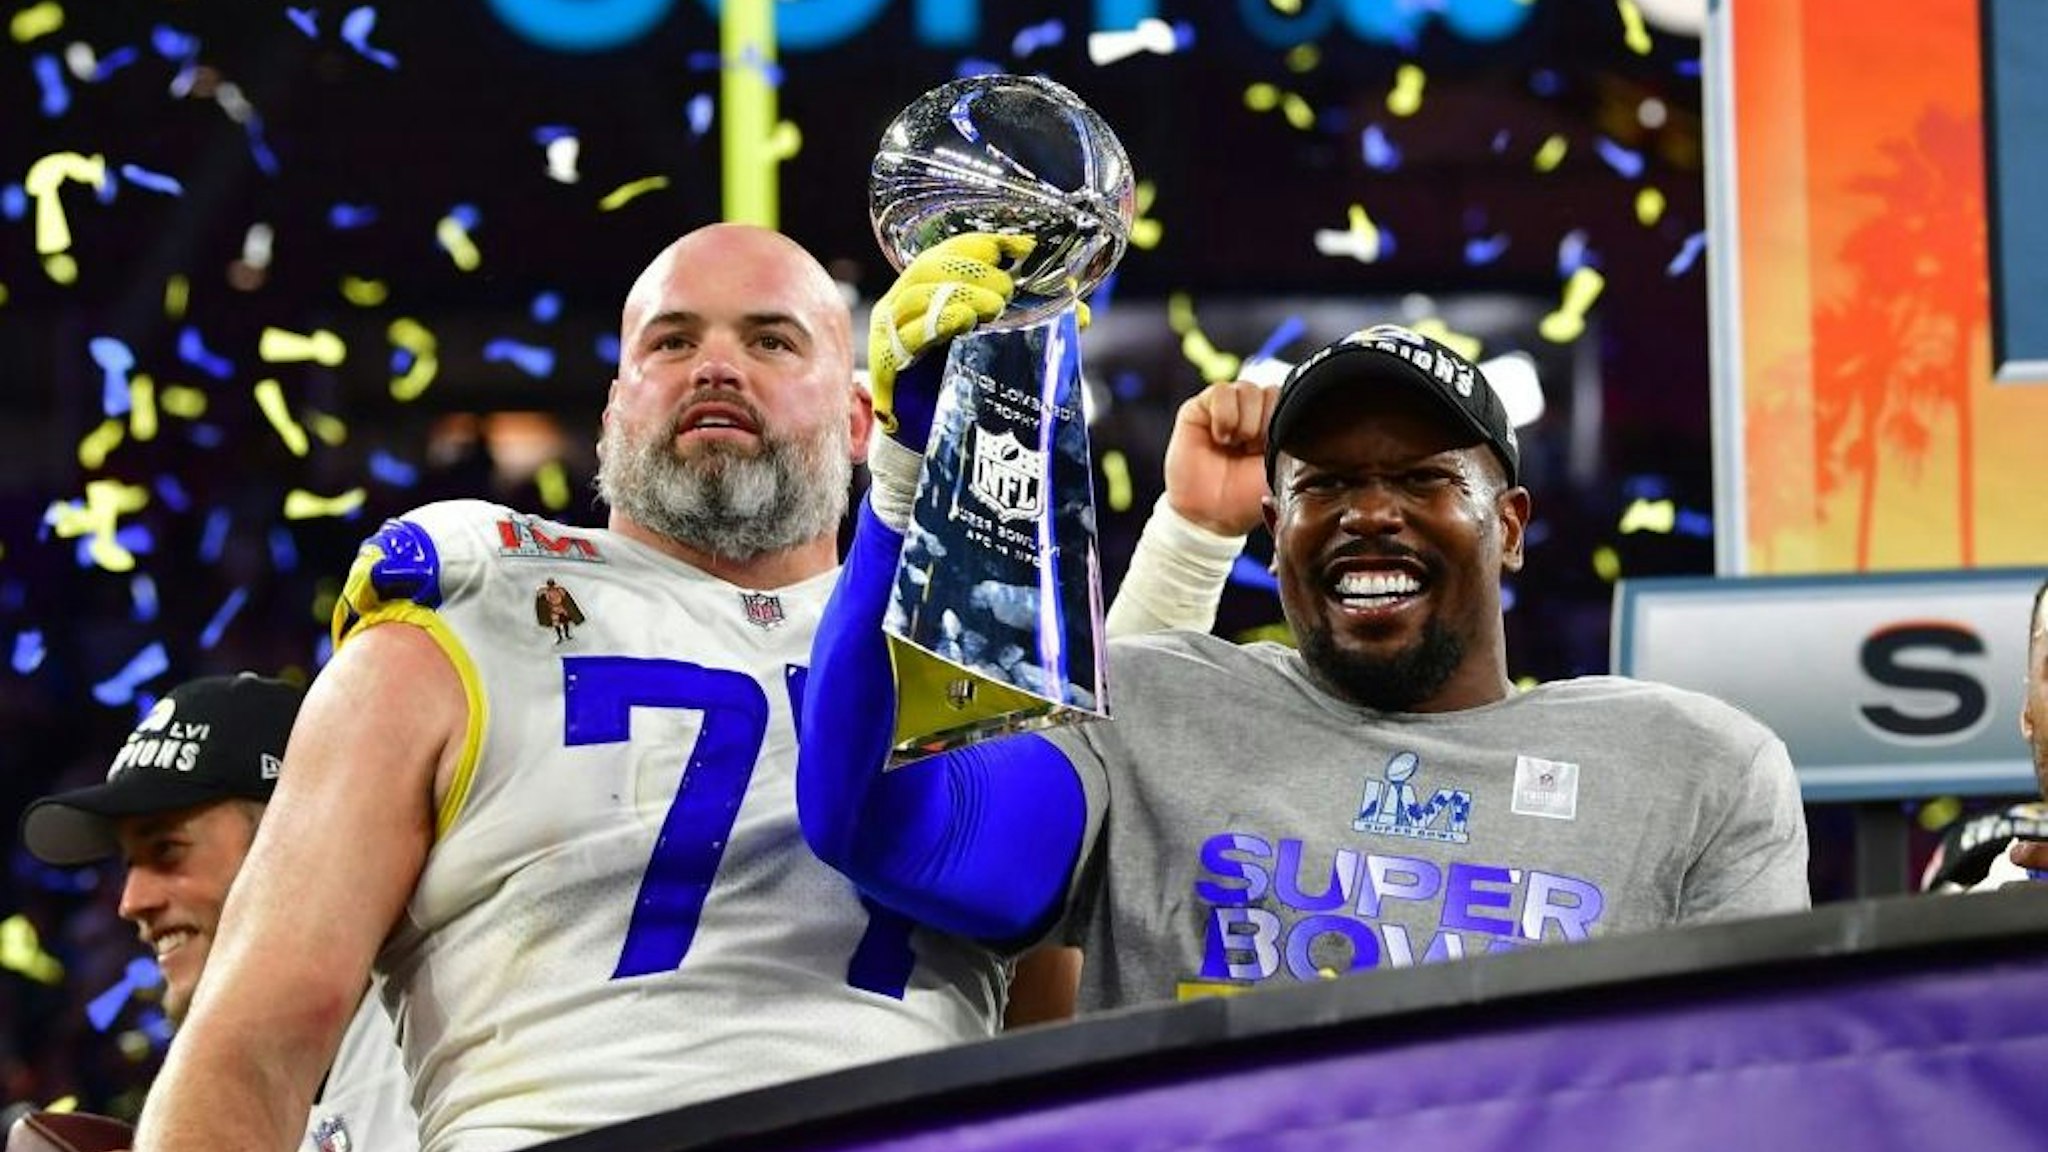 TOPSHOT - Los Angeles Rams' Andrew Whitworth (L) and Los Angeles Rams' Von Miller (R) hold the Vince Lombardi trophy after the LA Rams won Super Bowl LVI against the Cincinnati Bengals at SoFi Stadium in Inglewood, California, on February 13, 2022. (Photo by Frederic J. Brown / AFP) (Photo by FREDERIC J. BROWN/AFP via Getty Images)